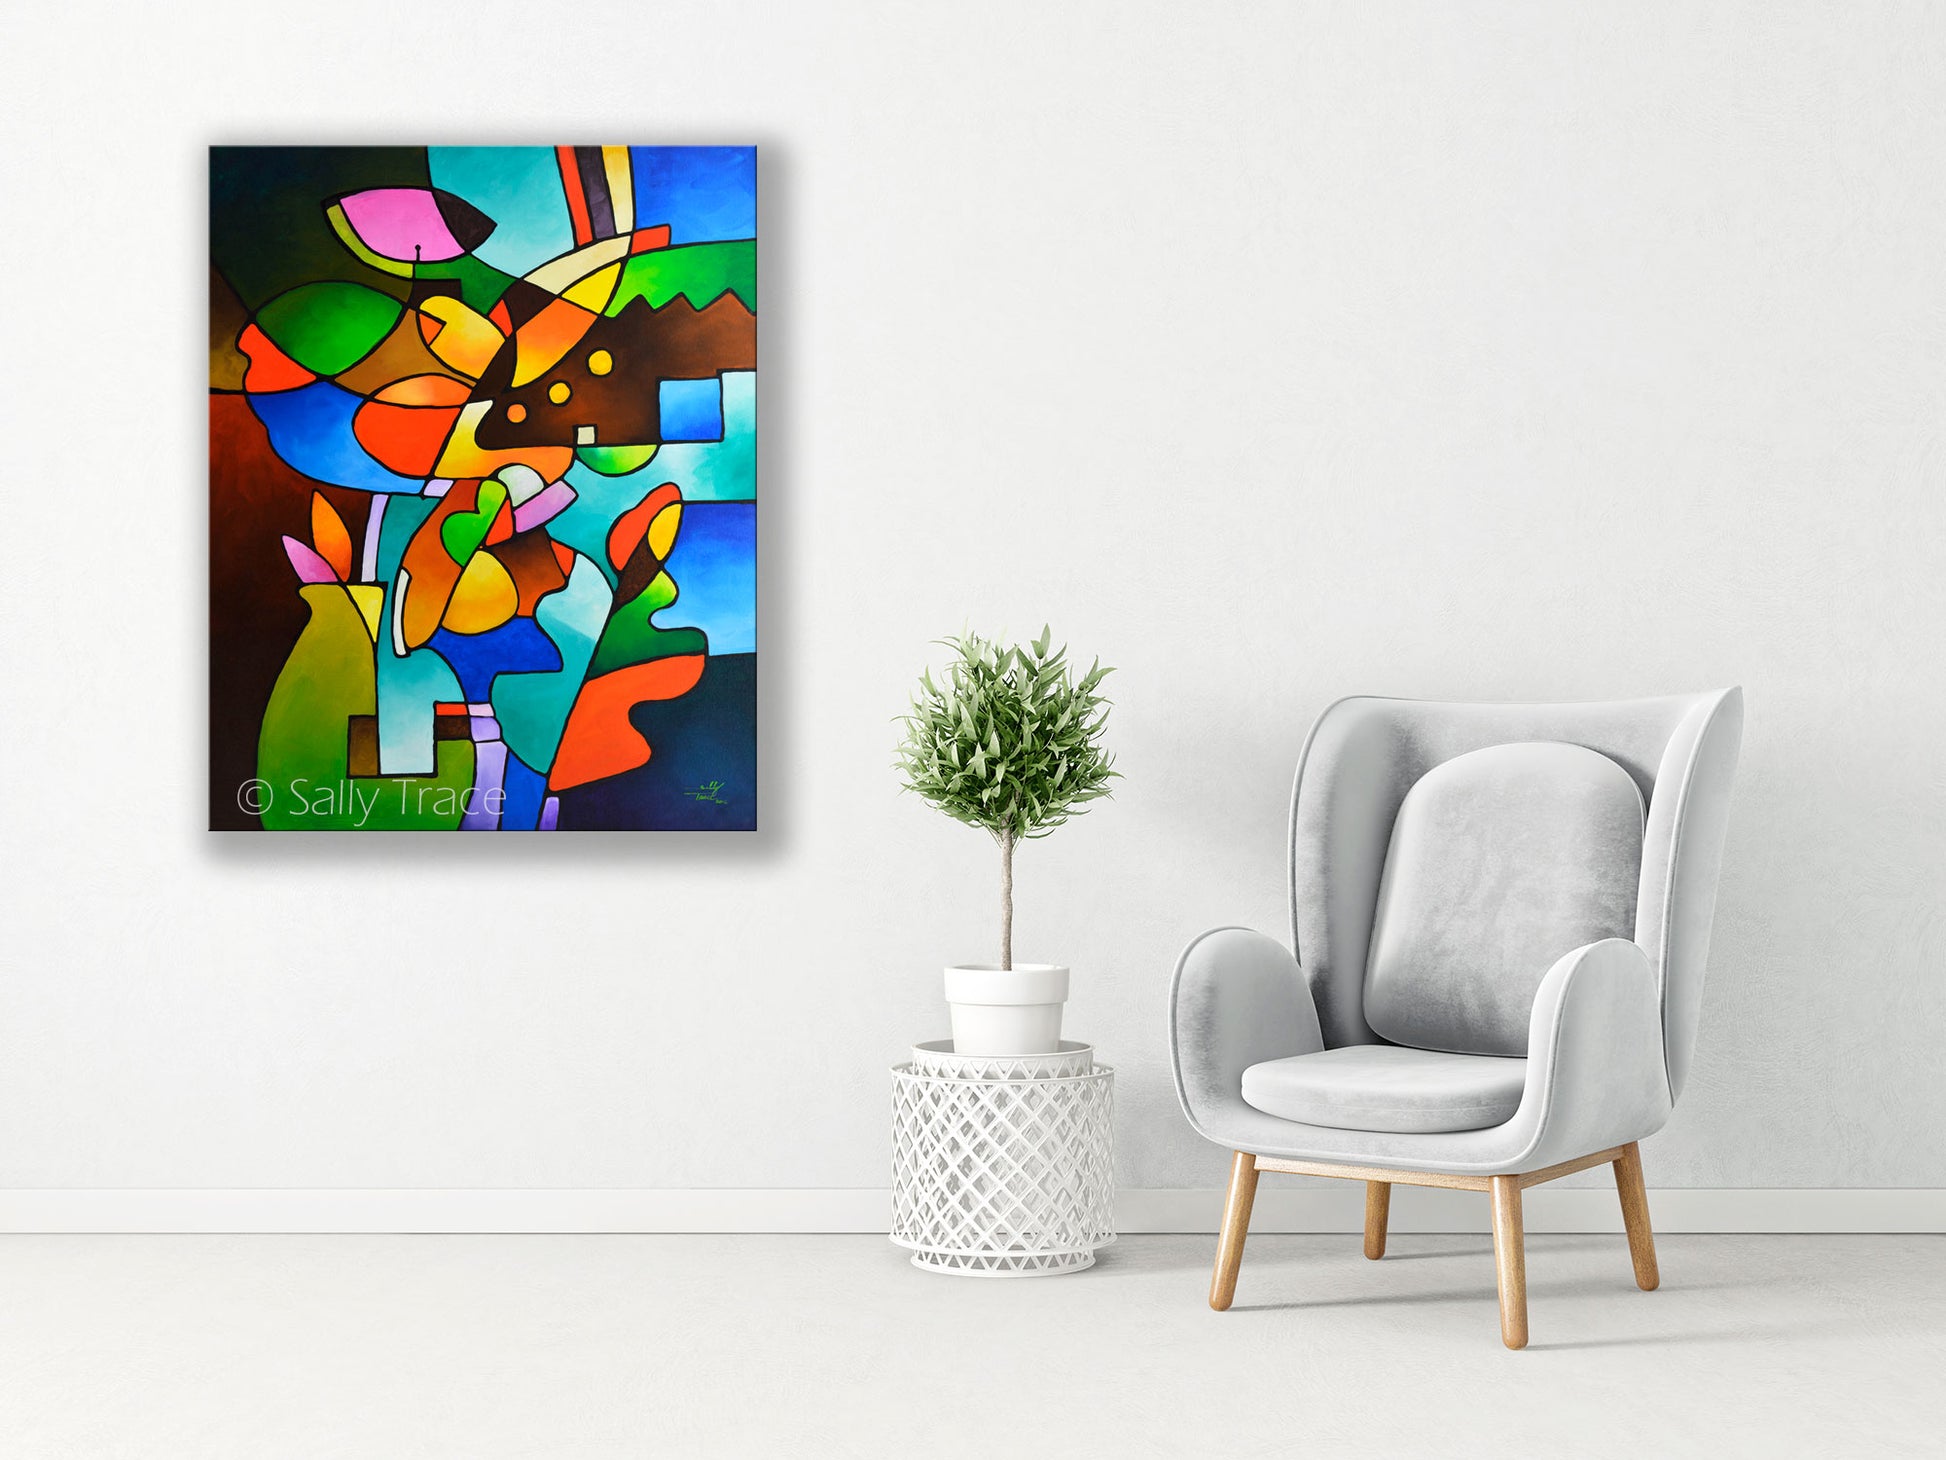 "Leaf and Vase" by Sally Trace, geometric cubist abstraction, fine art prints on canvas, room view